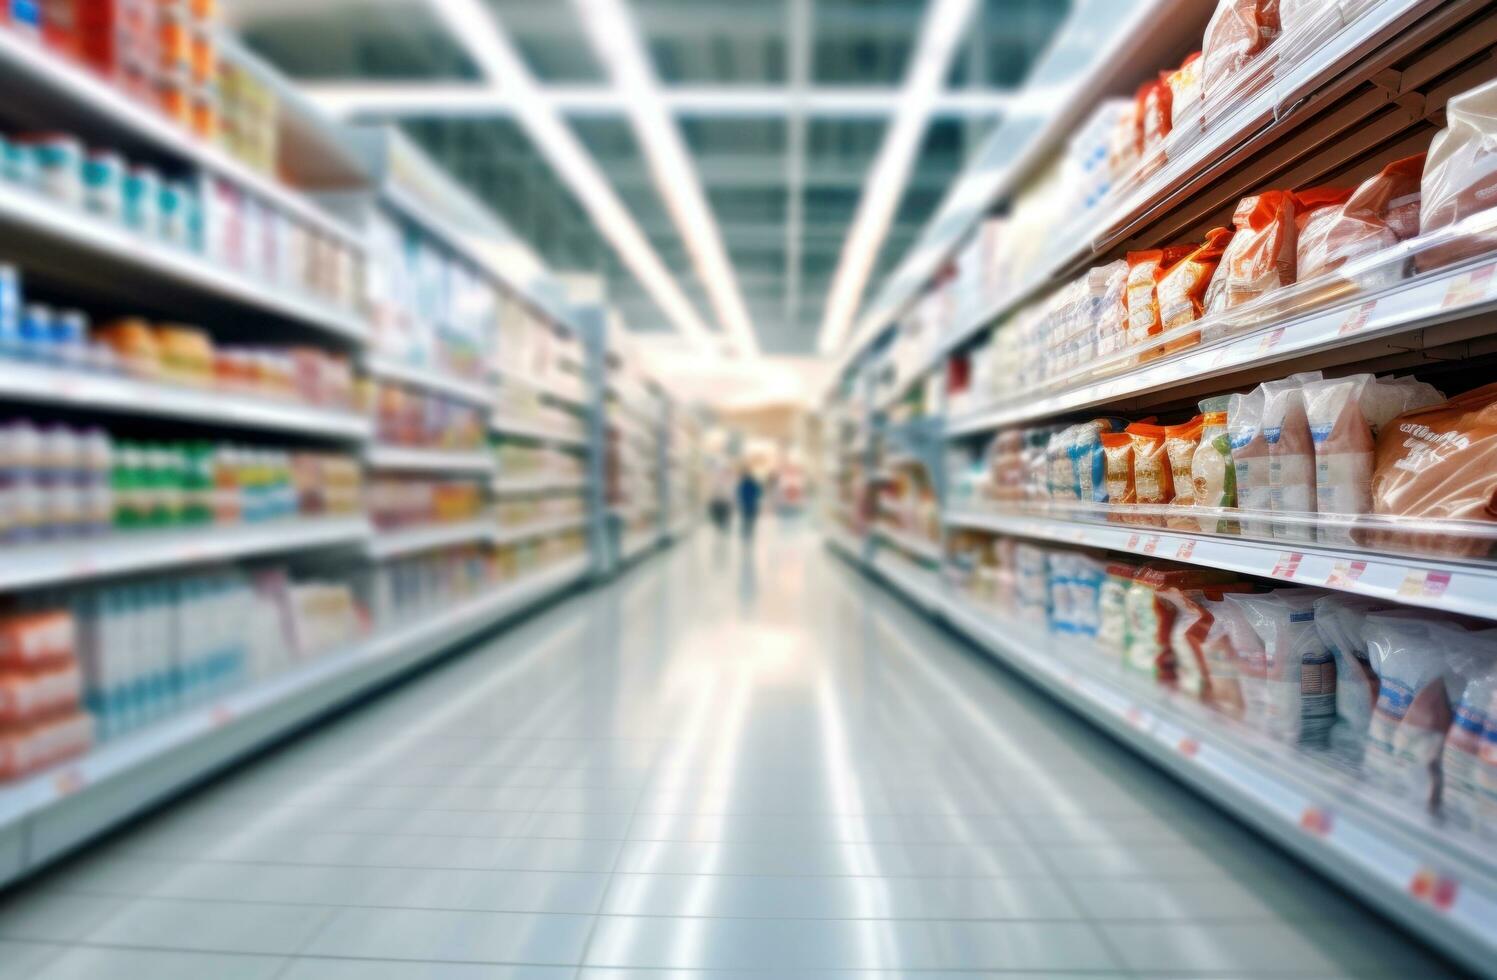 Blurred background in the main aisle of supermarket photo